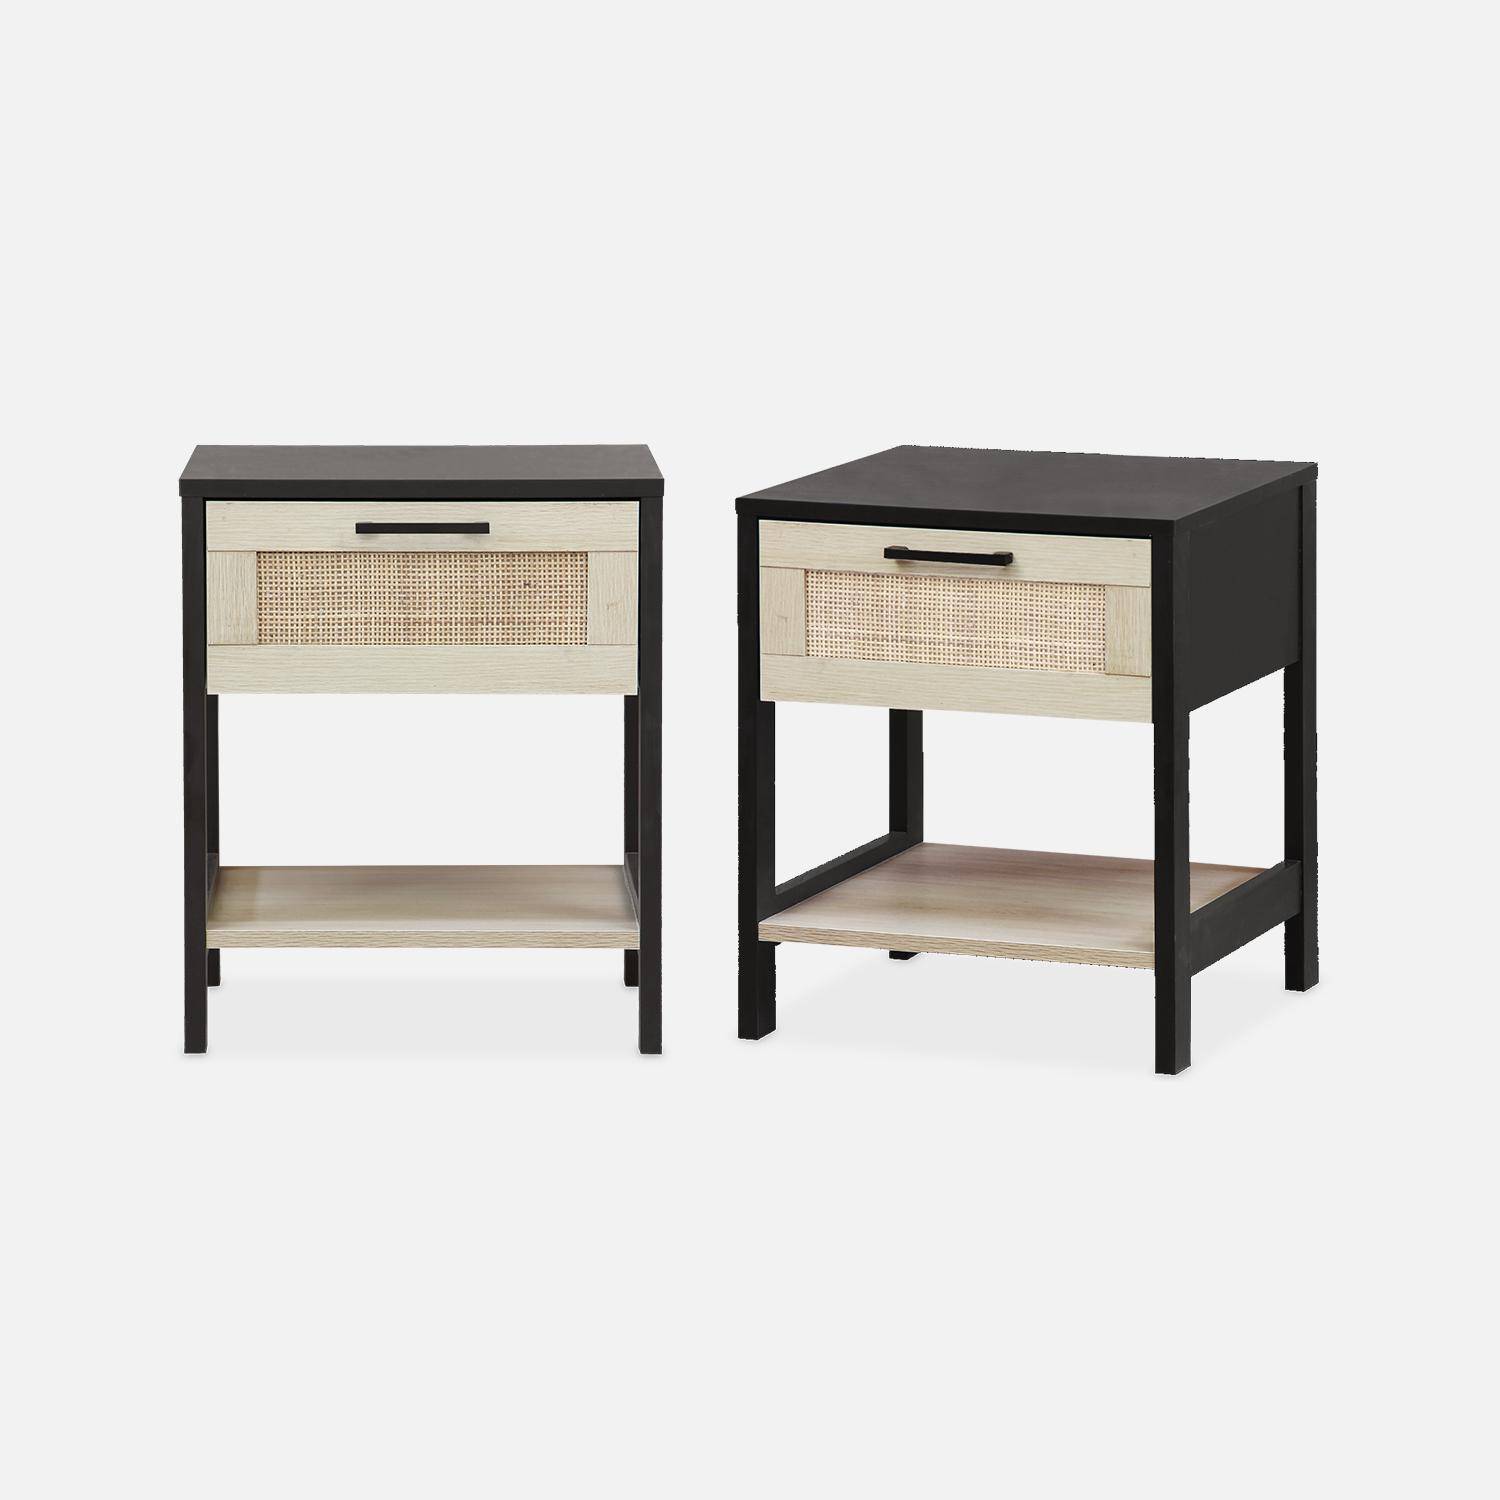 Pair of cane rattan bedside tables with drawer, 40x40x48cm - Bianca - Black Photo2